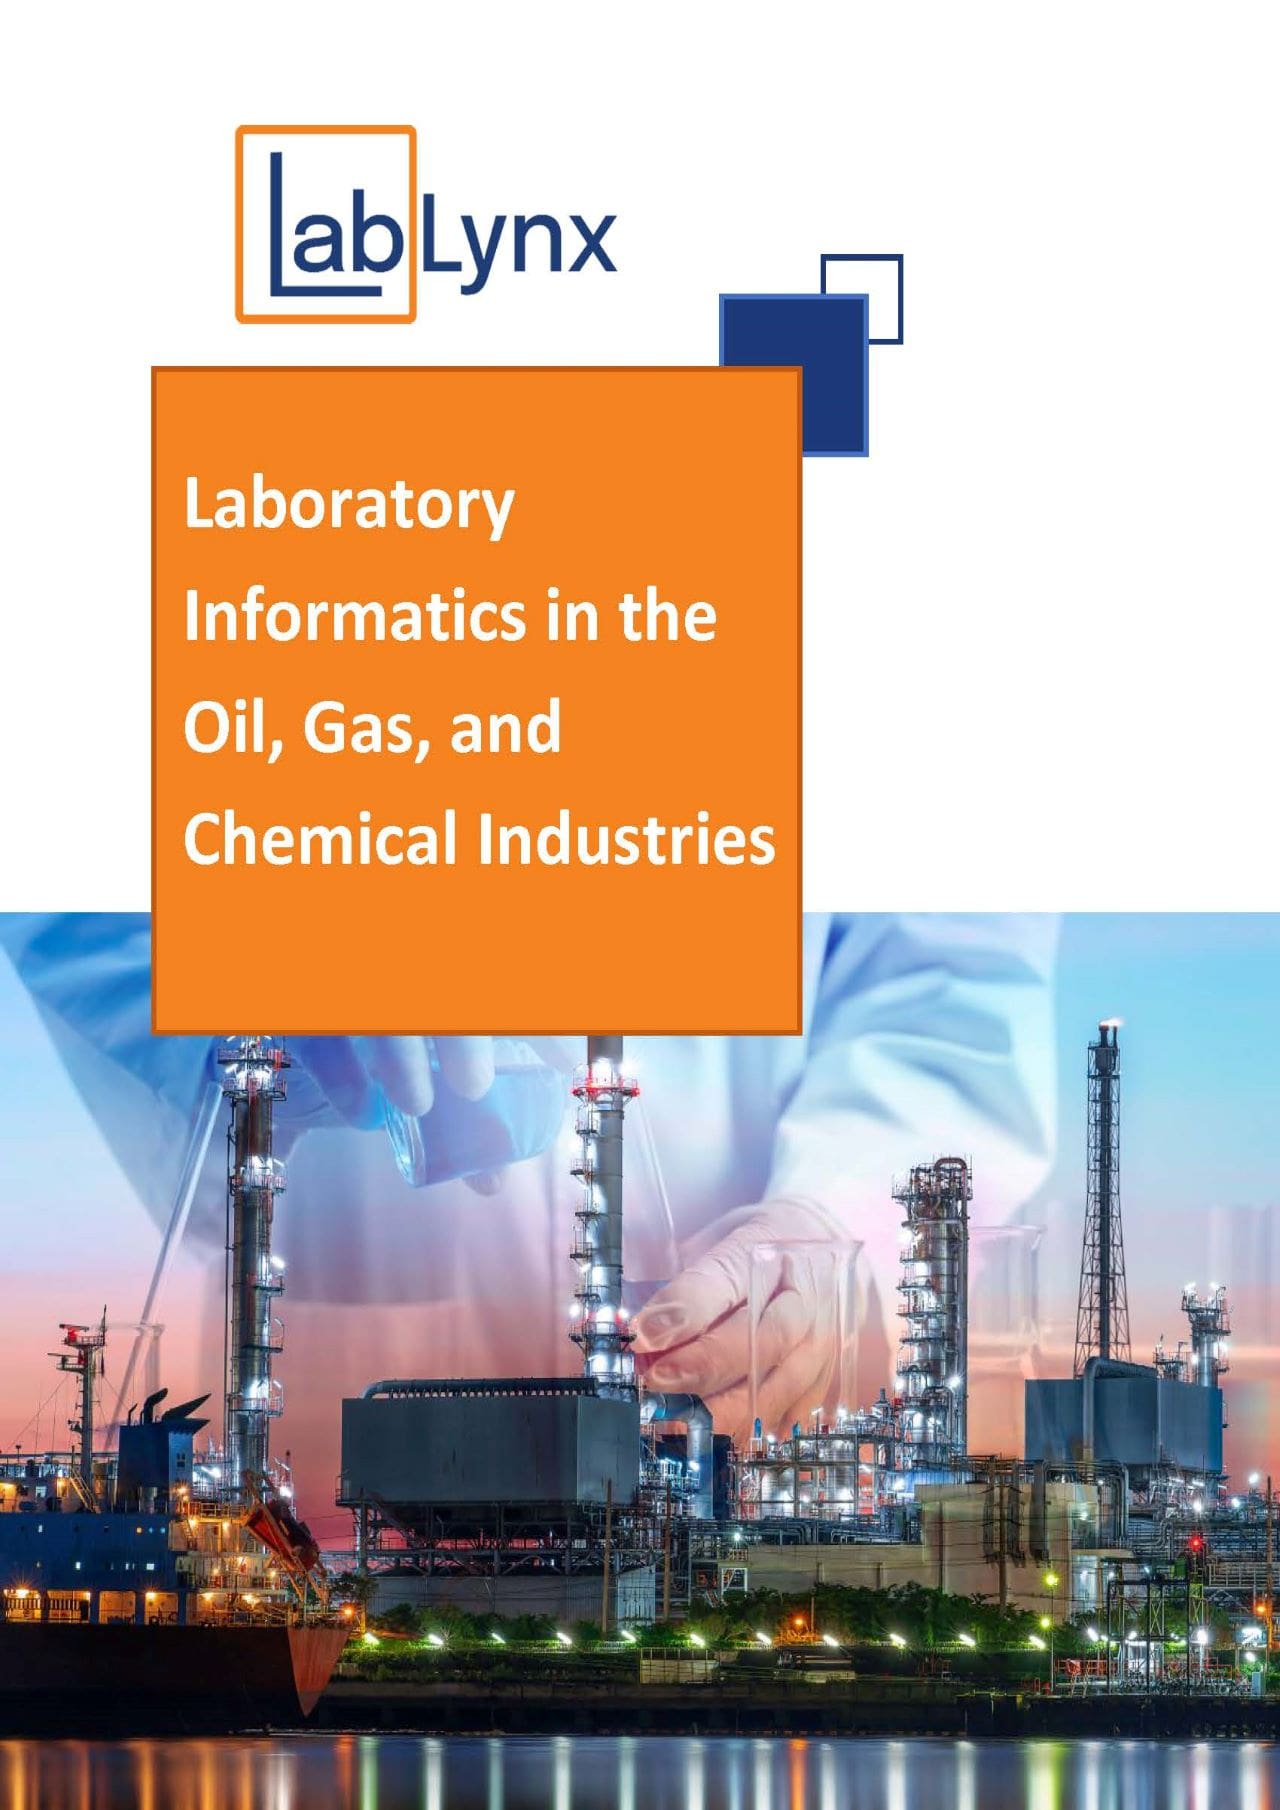 Laboratory Informatics in the Oil, Gas, and Chemical Industries | Brochures | LabLynx